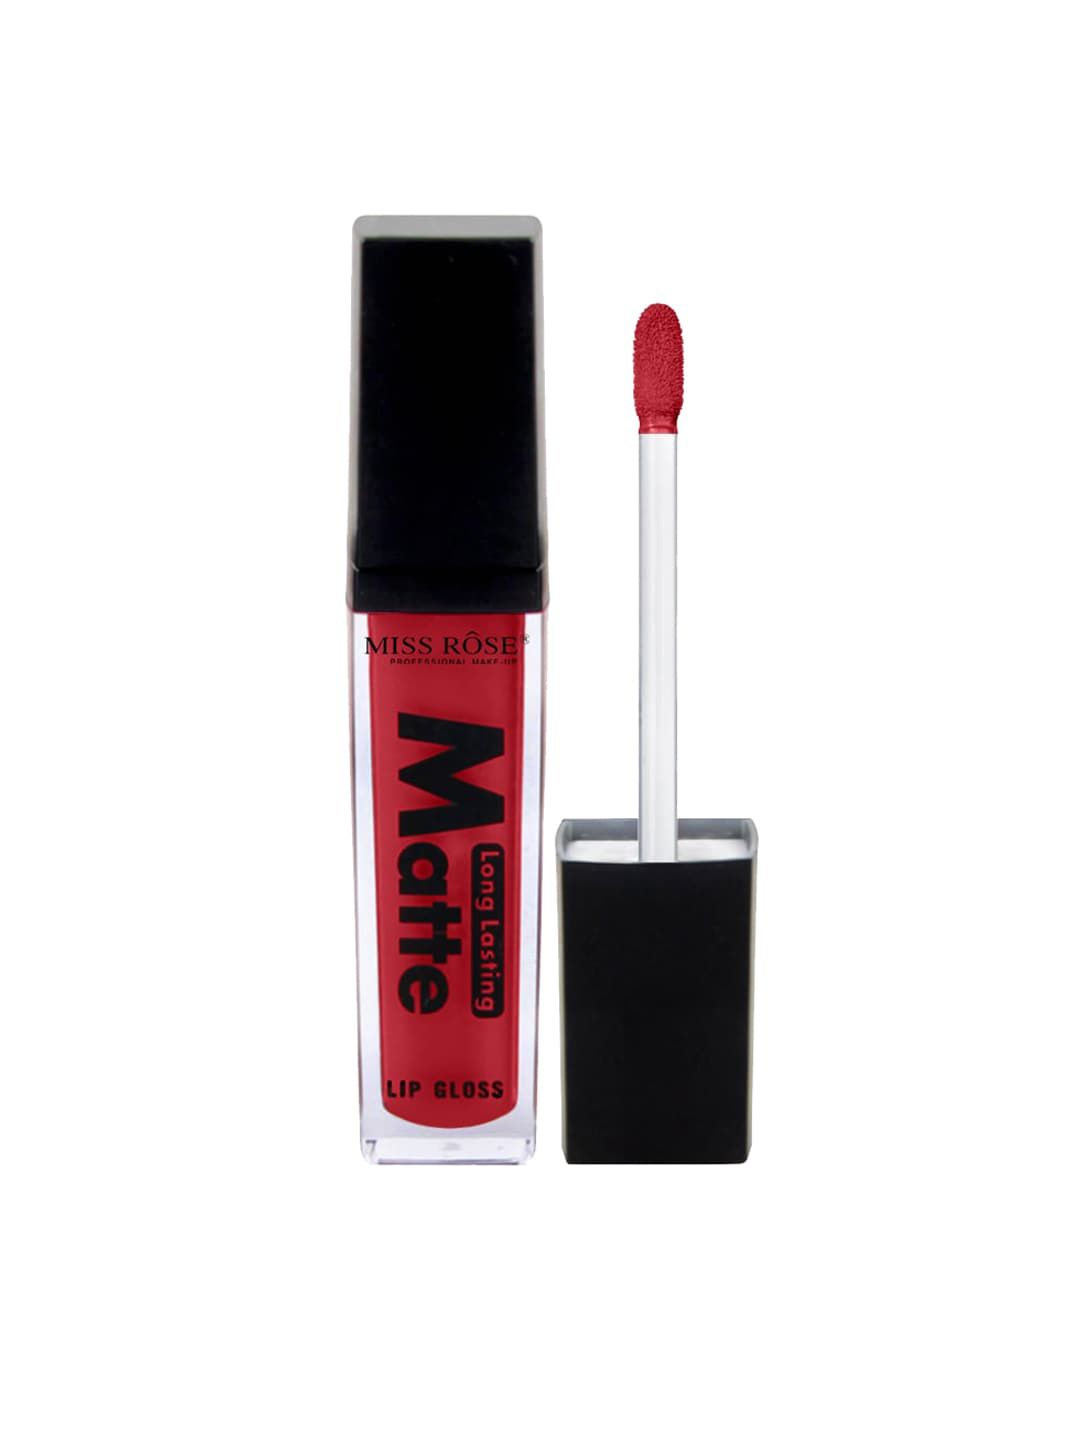 MISS ROSE Matte Long Lasting LipGloss 7701-002M 07 20 gm Price in India